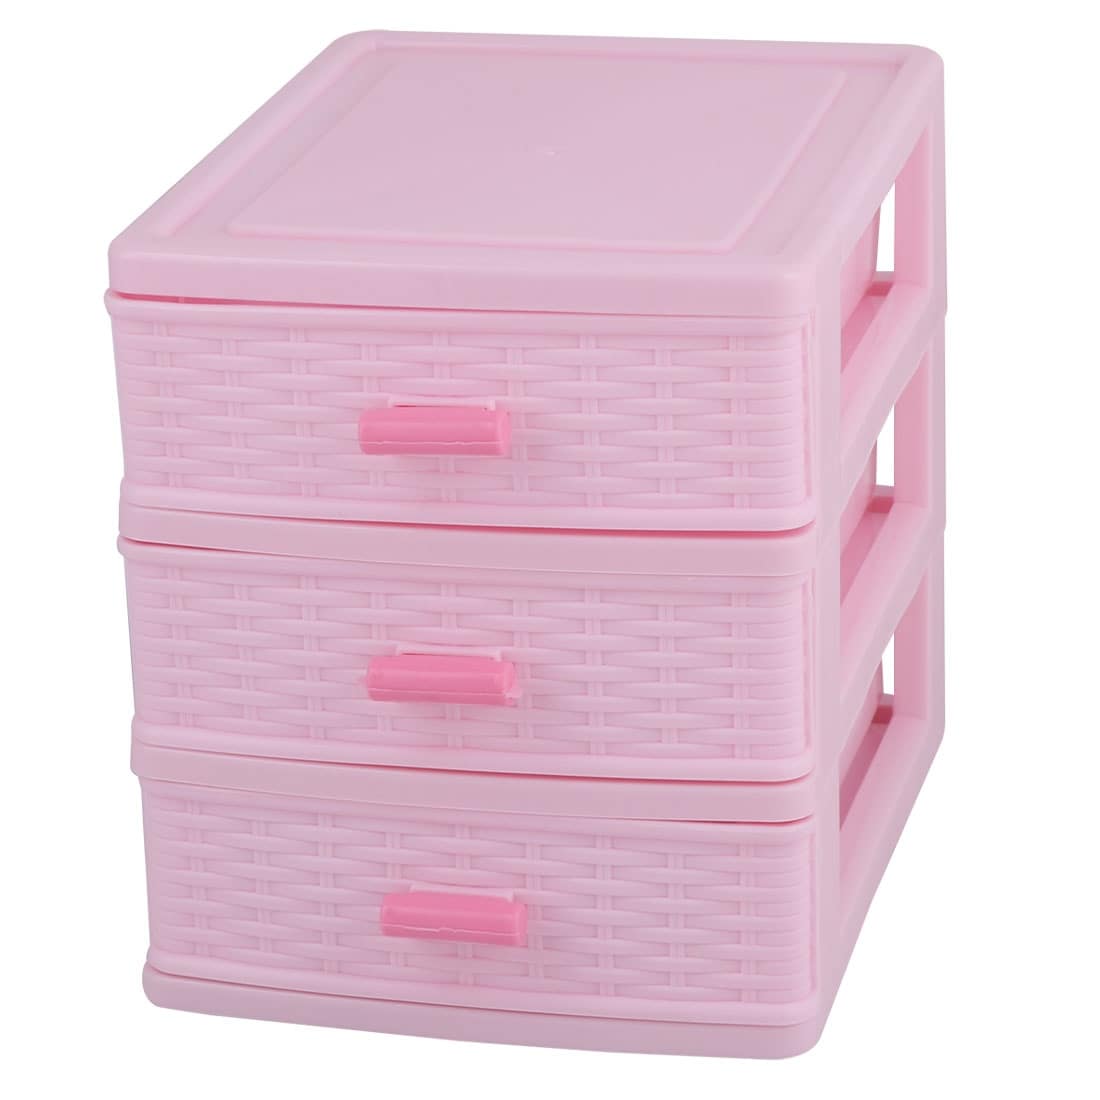 3/5 Layers Sunderies Organizer Clear Storage Box Container